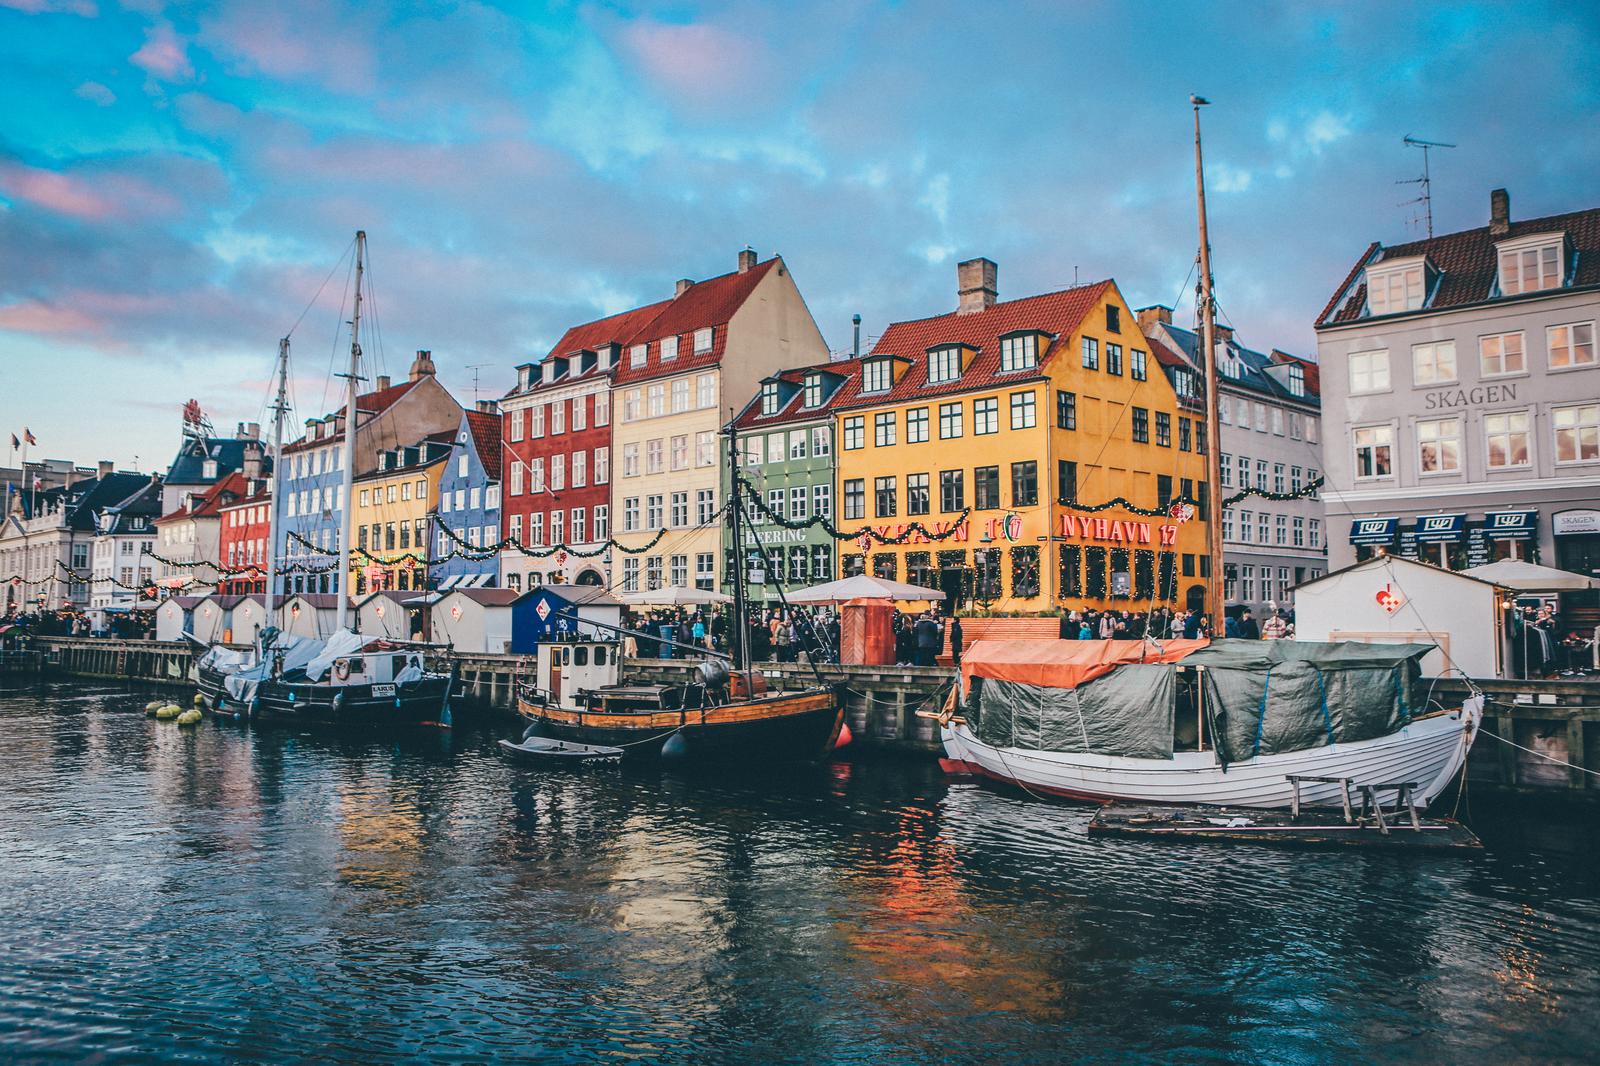 Can You Pass This 40-Question Geography Test That Gets Progressively Harder With Each Question? Denmark